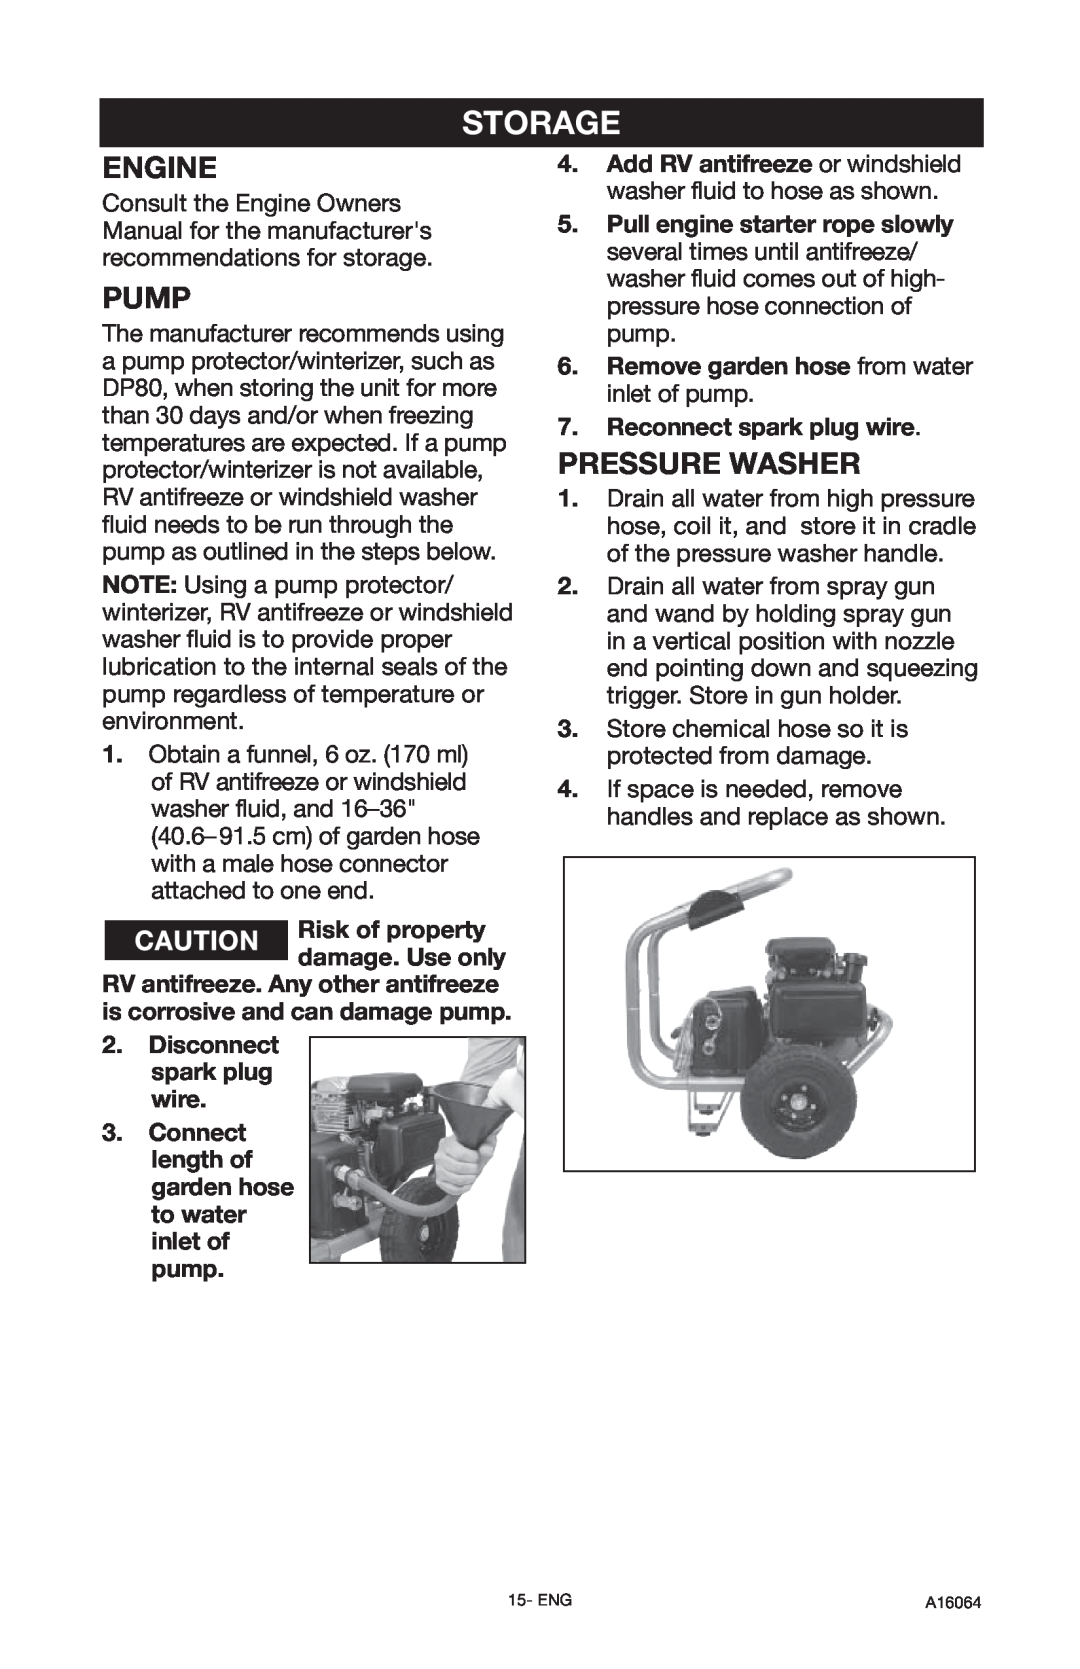 DeVillbiss Air Power Company DVH2600, A16064 Storage, Pressure Washer, Risk of property damage. Use only, Engine, Pump 